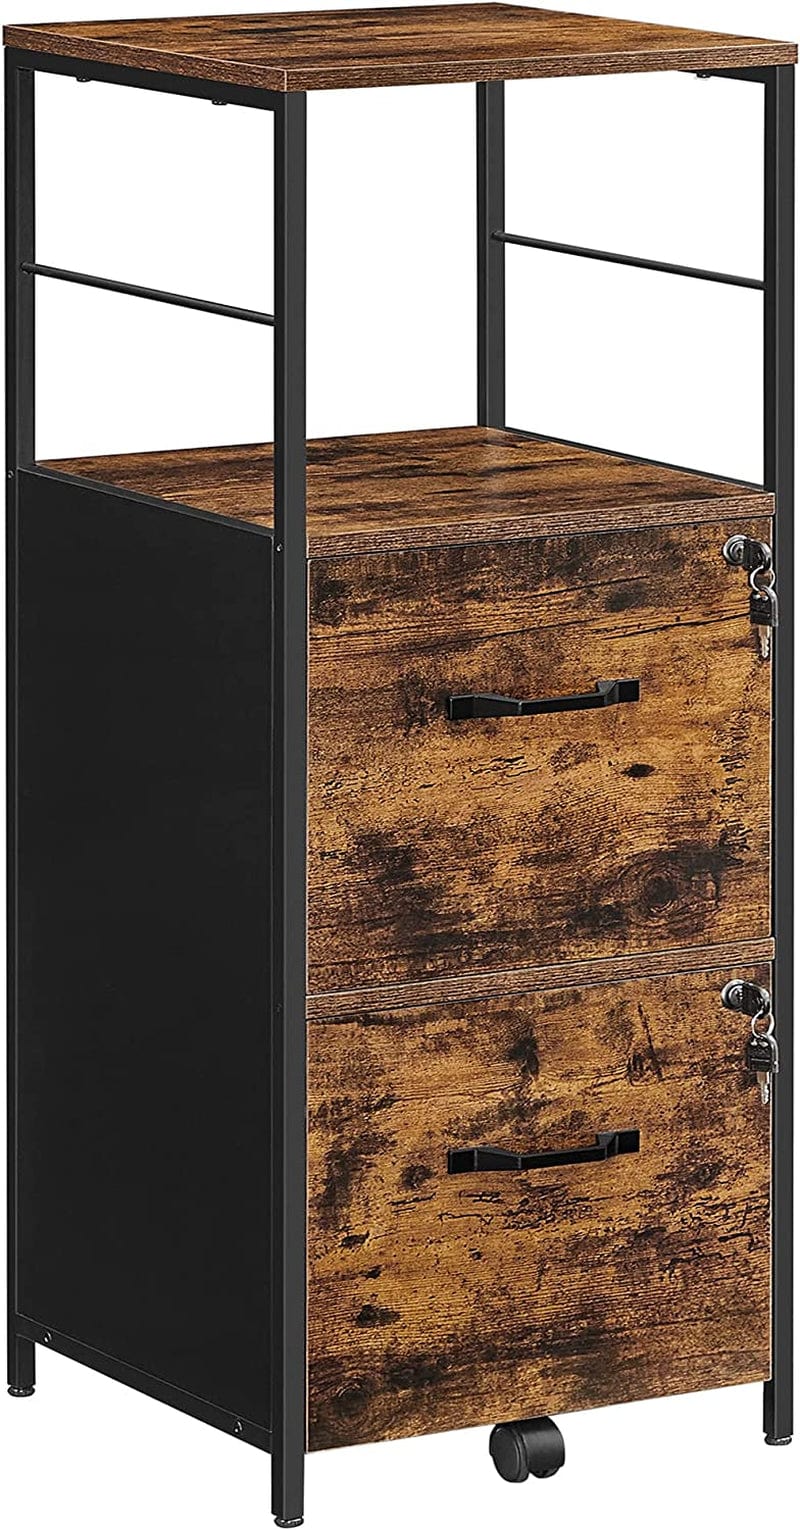 VASAGLE File Cabinet, Filing Cabinet for Home Office, with Lock and 2 Drawers, A4 and Letter Sized Files, Printer Stand,Rustic Brown and Black UOFC045B01